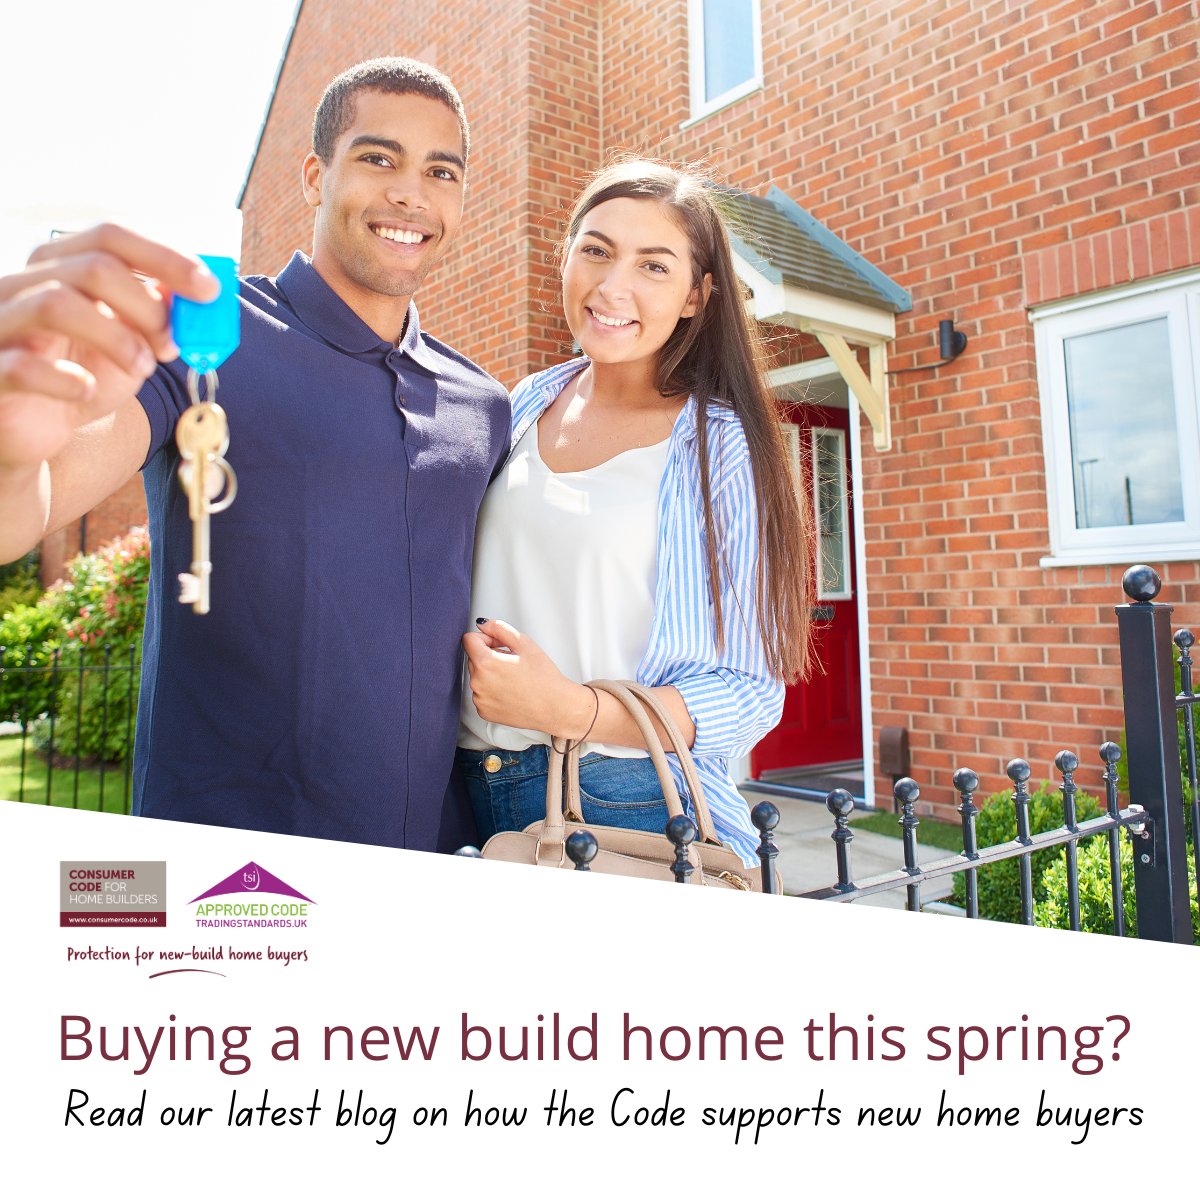 ❓Are you a new home buyer looking for reassurance about the Code and how we can support you? Read our blog for some facts about the Code and how the work we do helps ensure you receive great service throughout your purchase consumercode.co.uk/fabulous-facts…